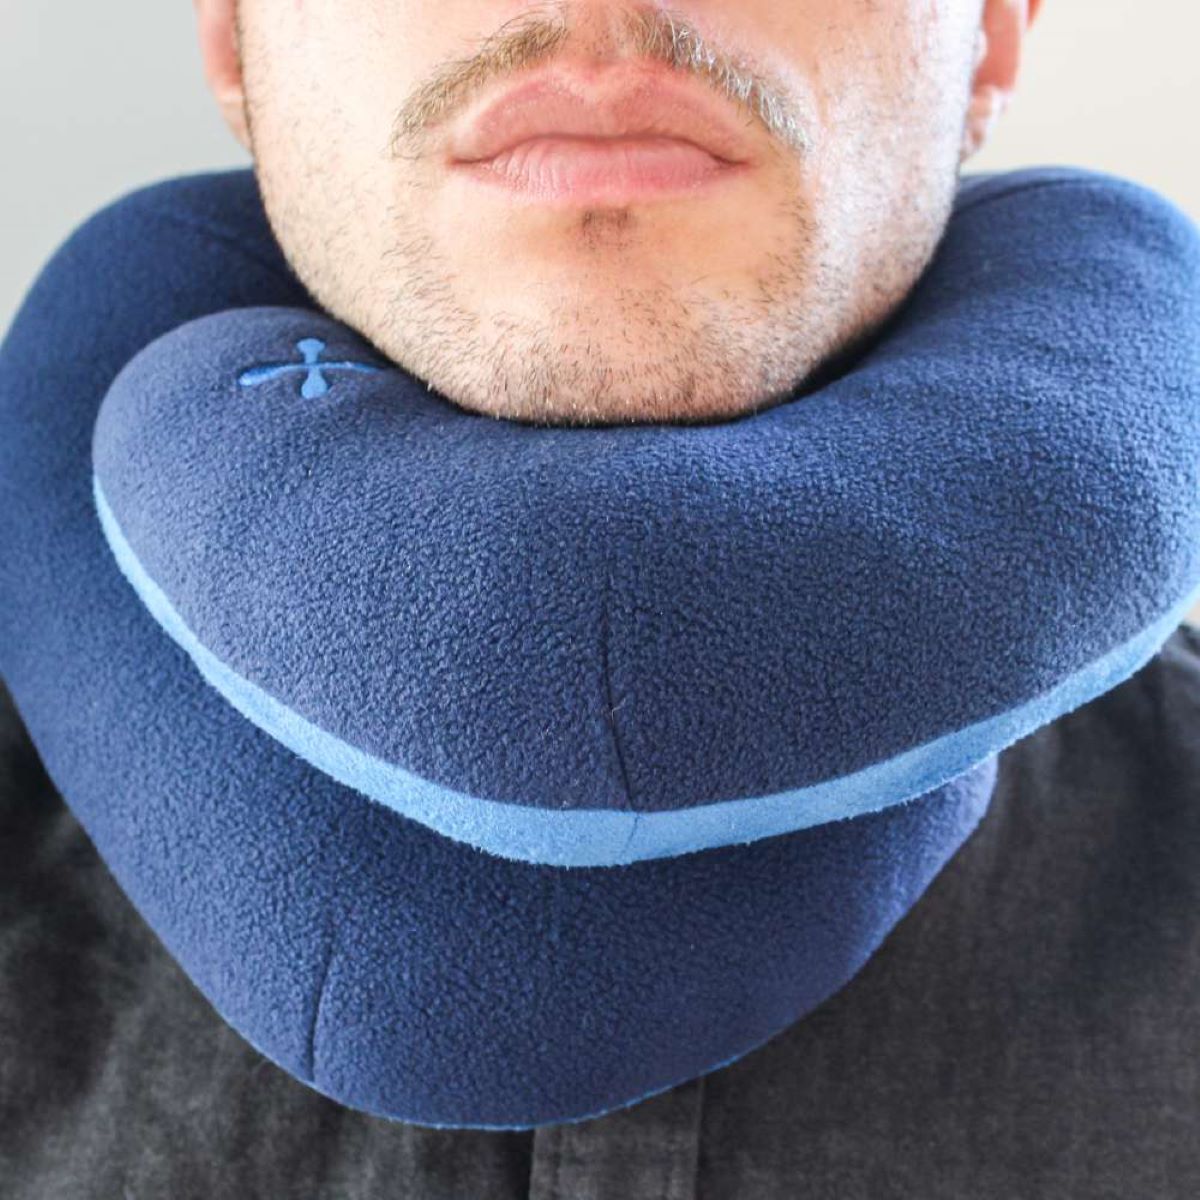 https://www.touristsecrets.com/wp-content/uploads/2023/09/11-amazing-neck-pillow-with-chin-support-for-2023-1694708080.jpg